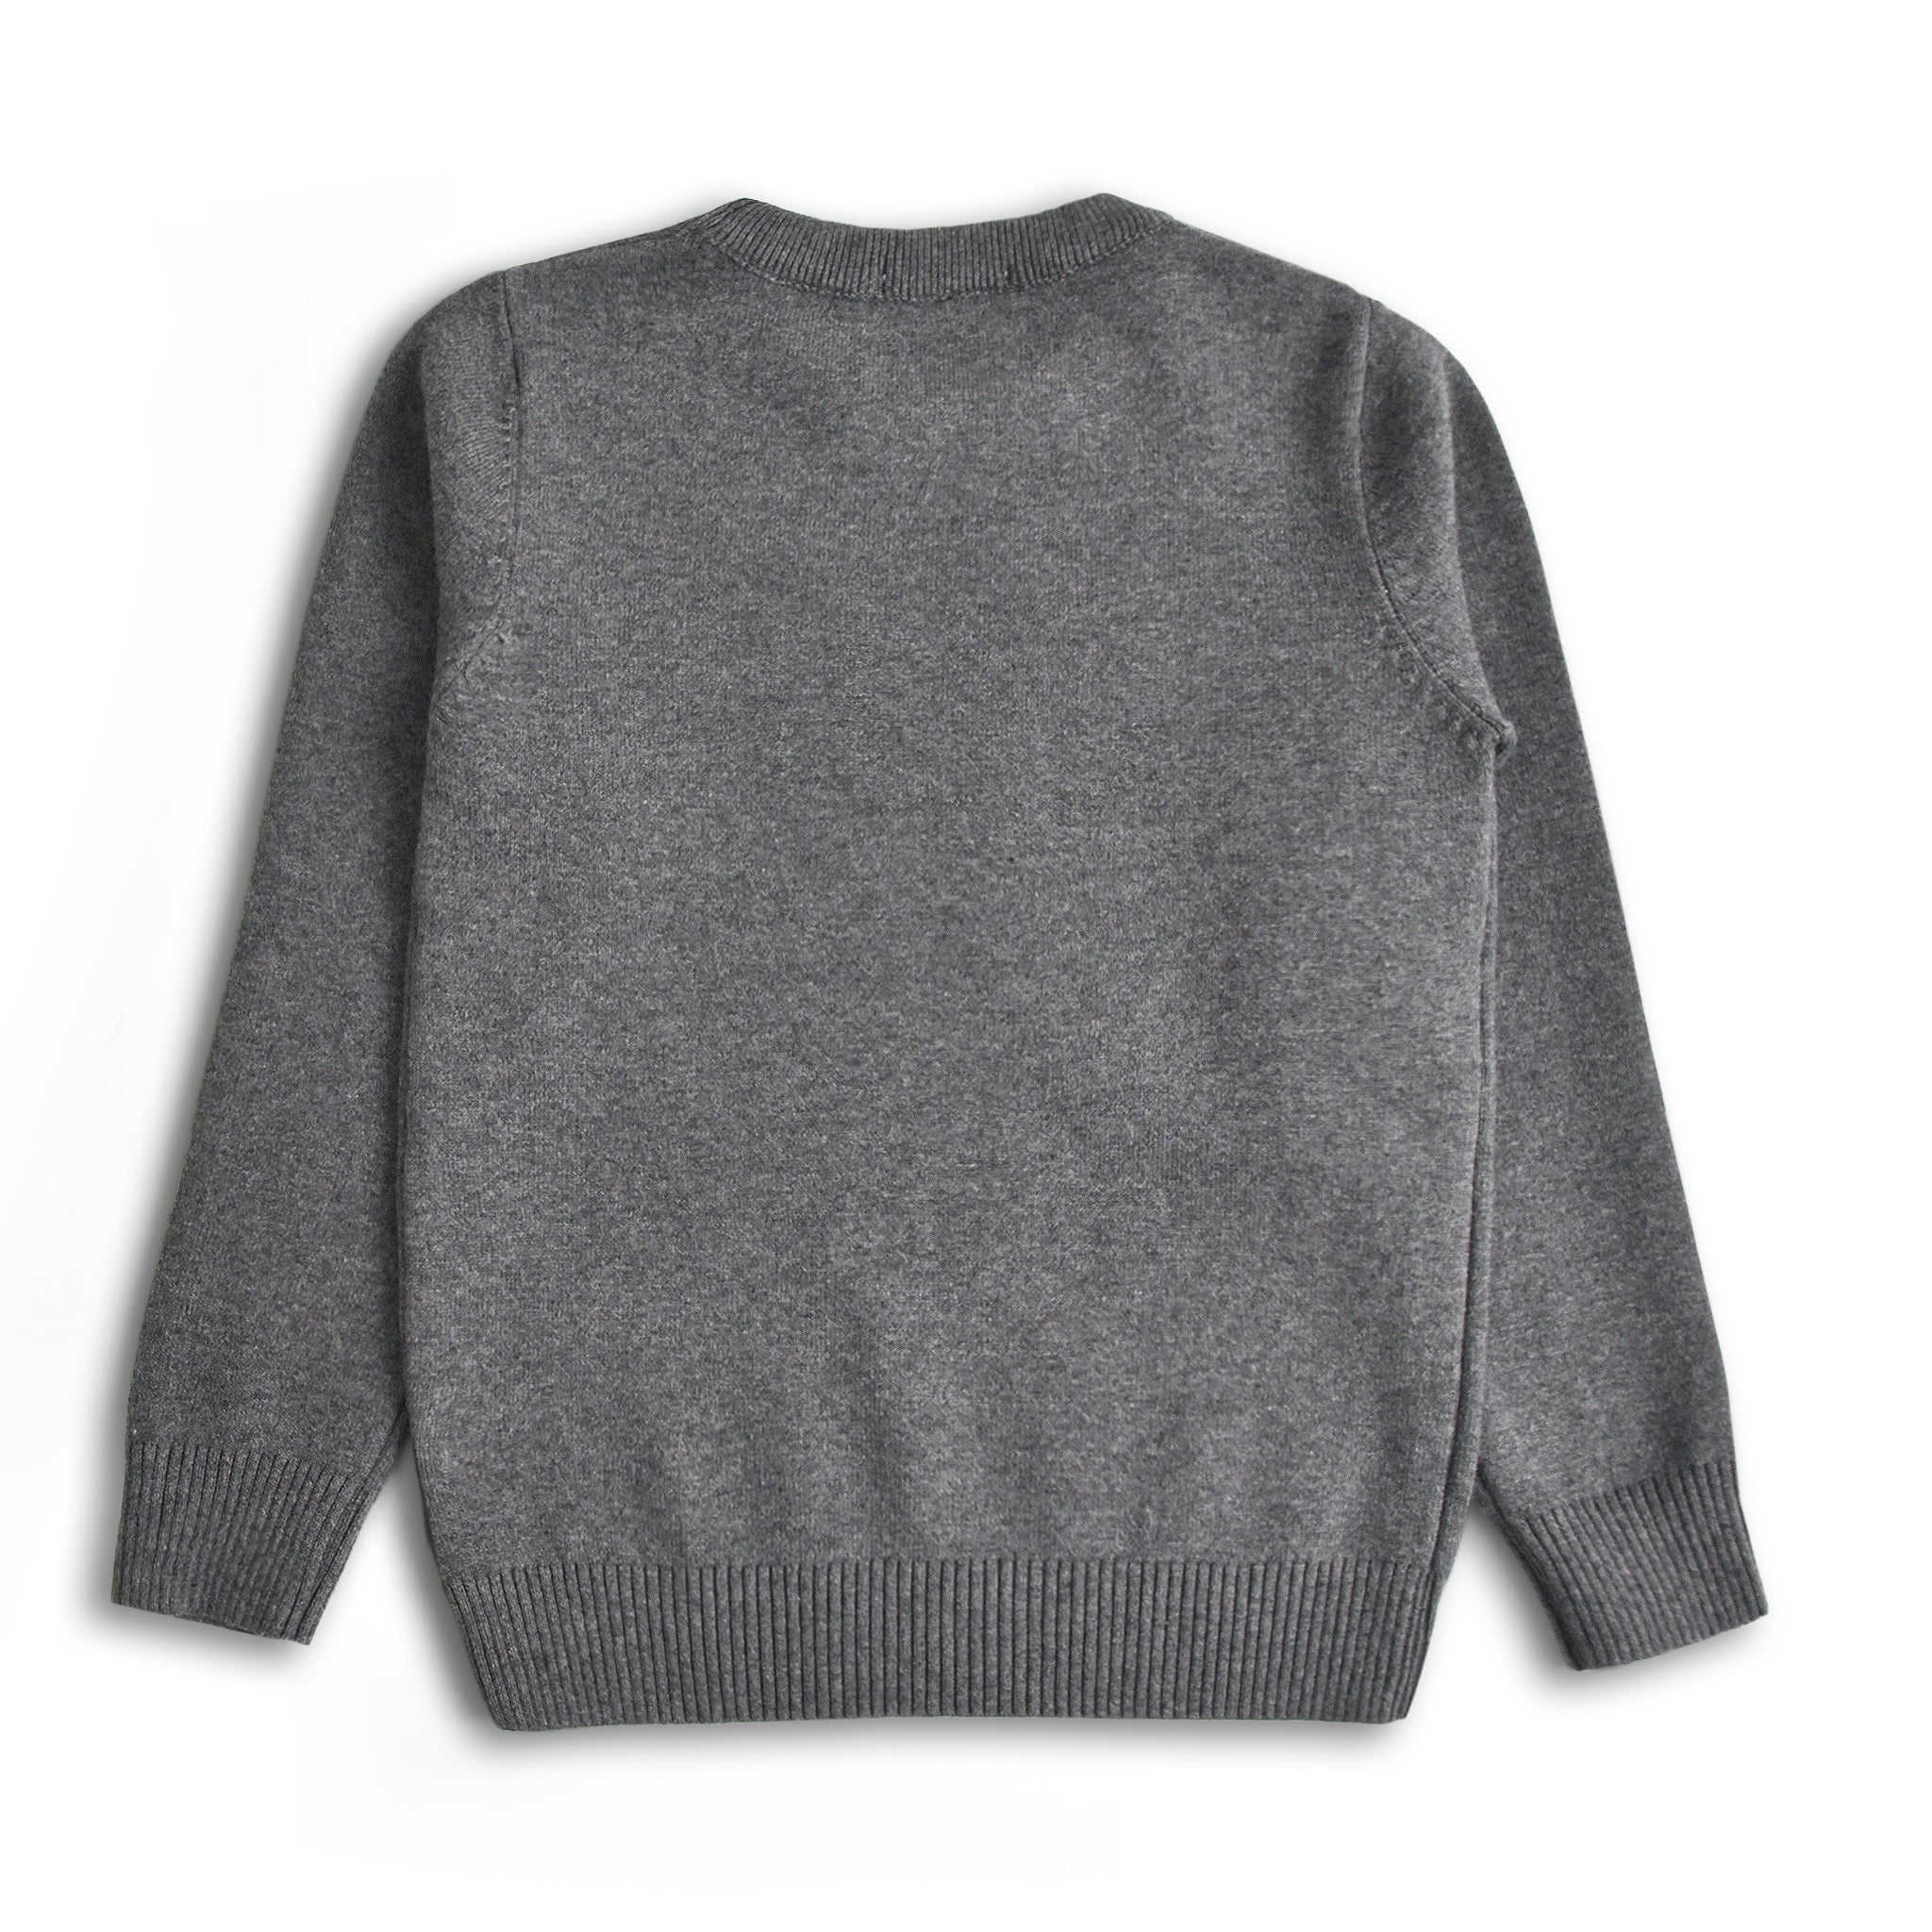 Charcoal Grey Sweater